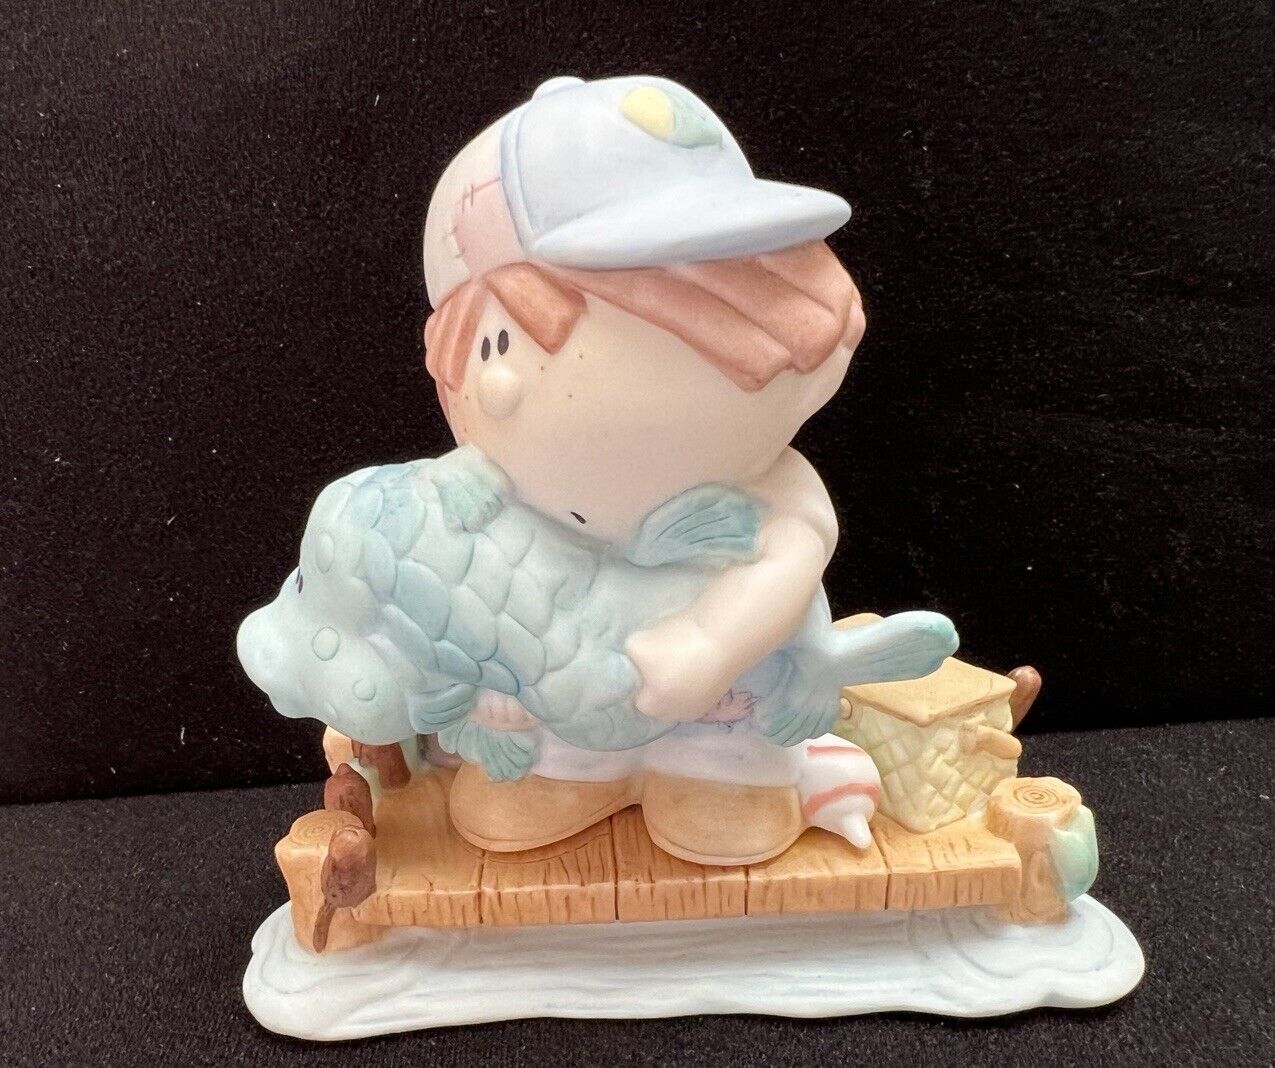 Porcelain Bisque Bumpkins Figurine Baby with Fish Catch of the Day 1996